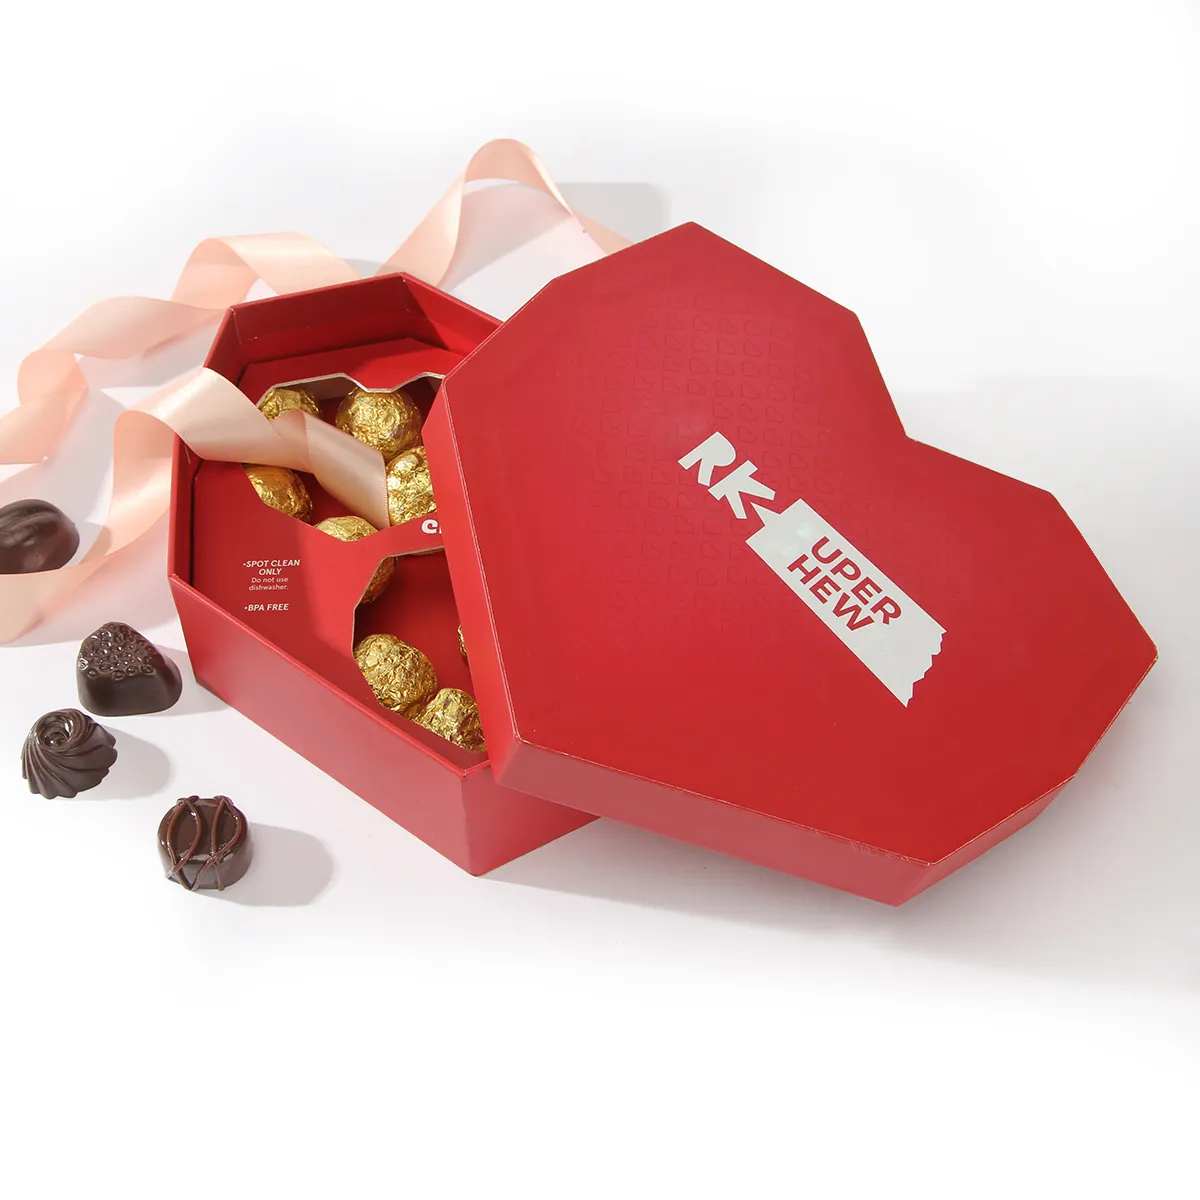 Rigid Chocolate Valentine Gift Case Red Candy Box Heart Shape Chocolate Boxes With Divider Insert